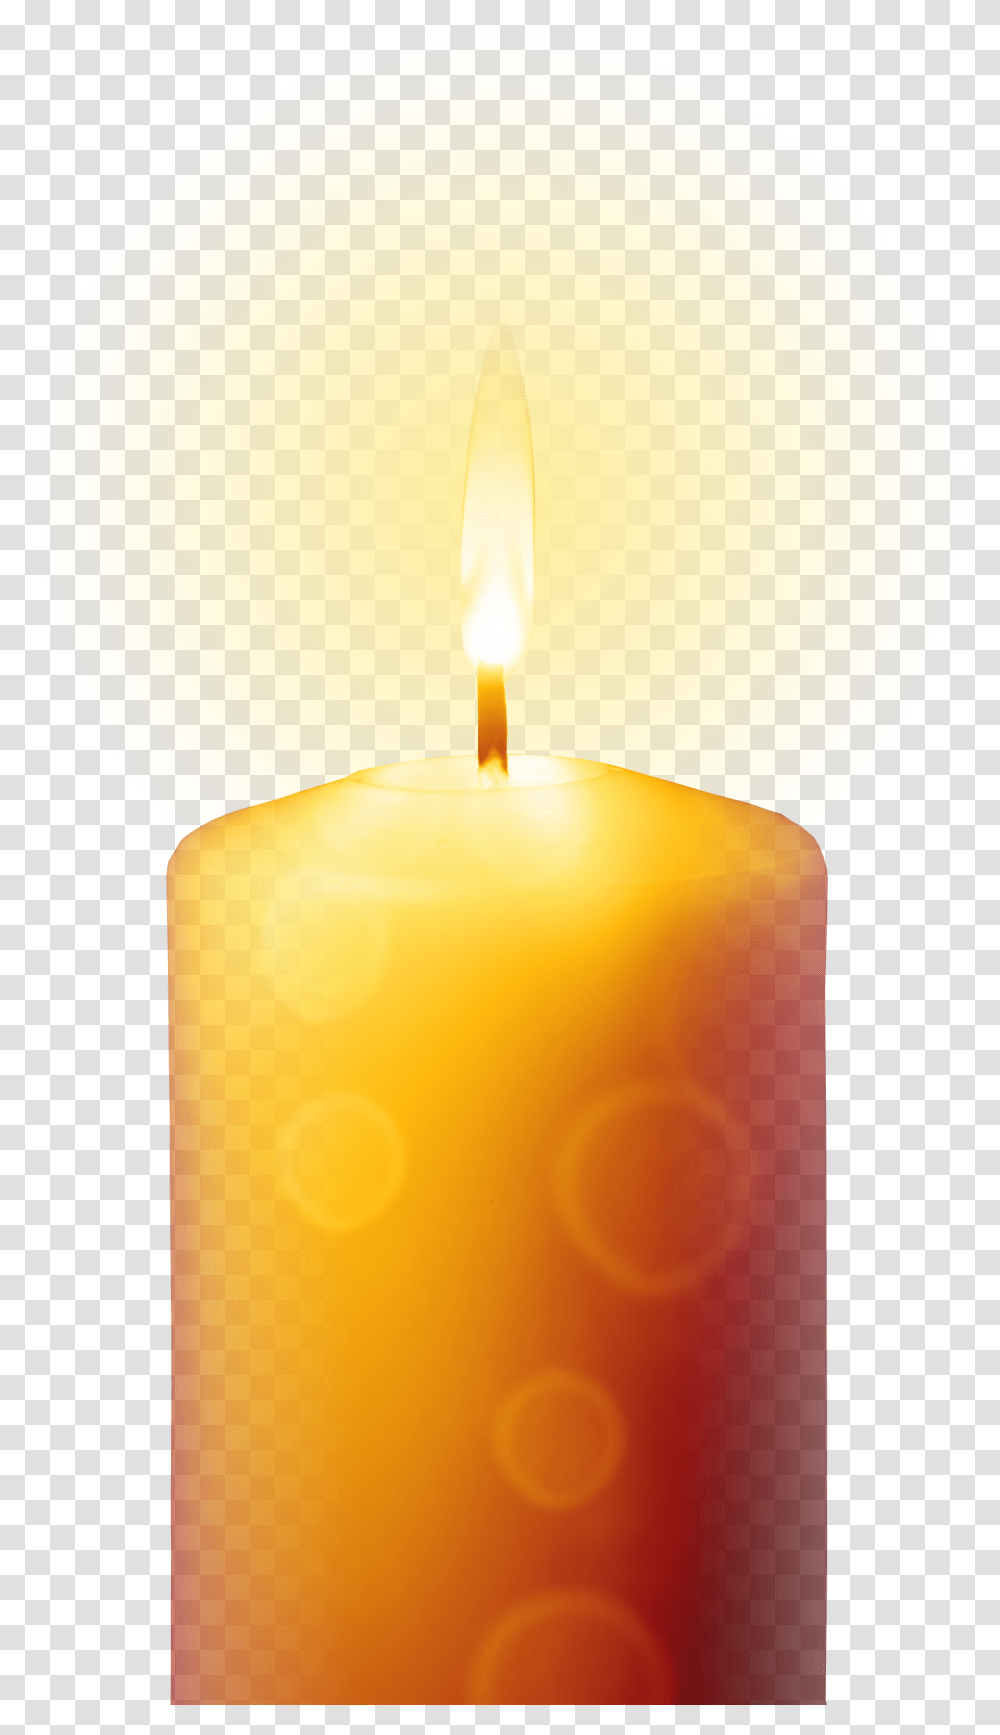 Rest In Peace Candle, Lamp, Fire, Flame Transparent Png